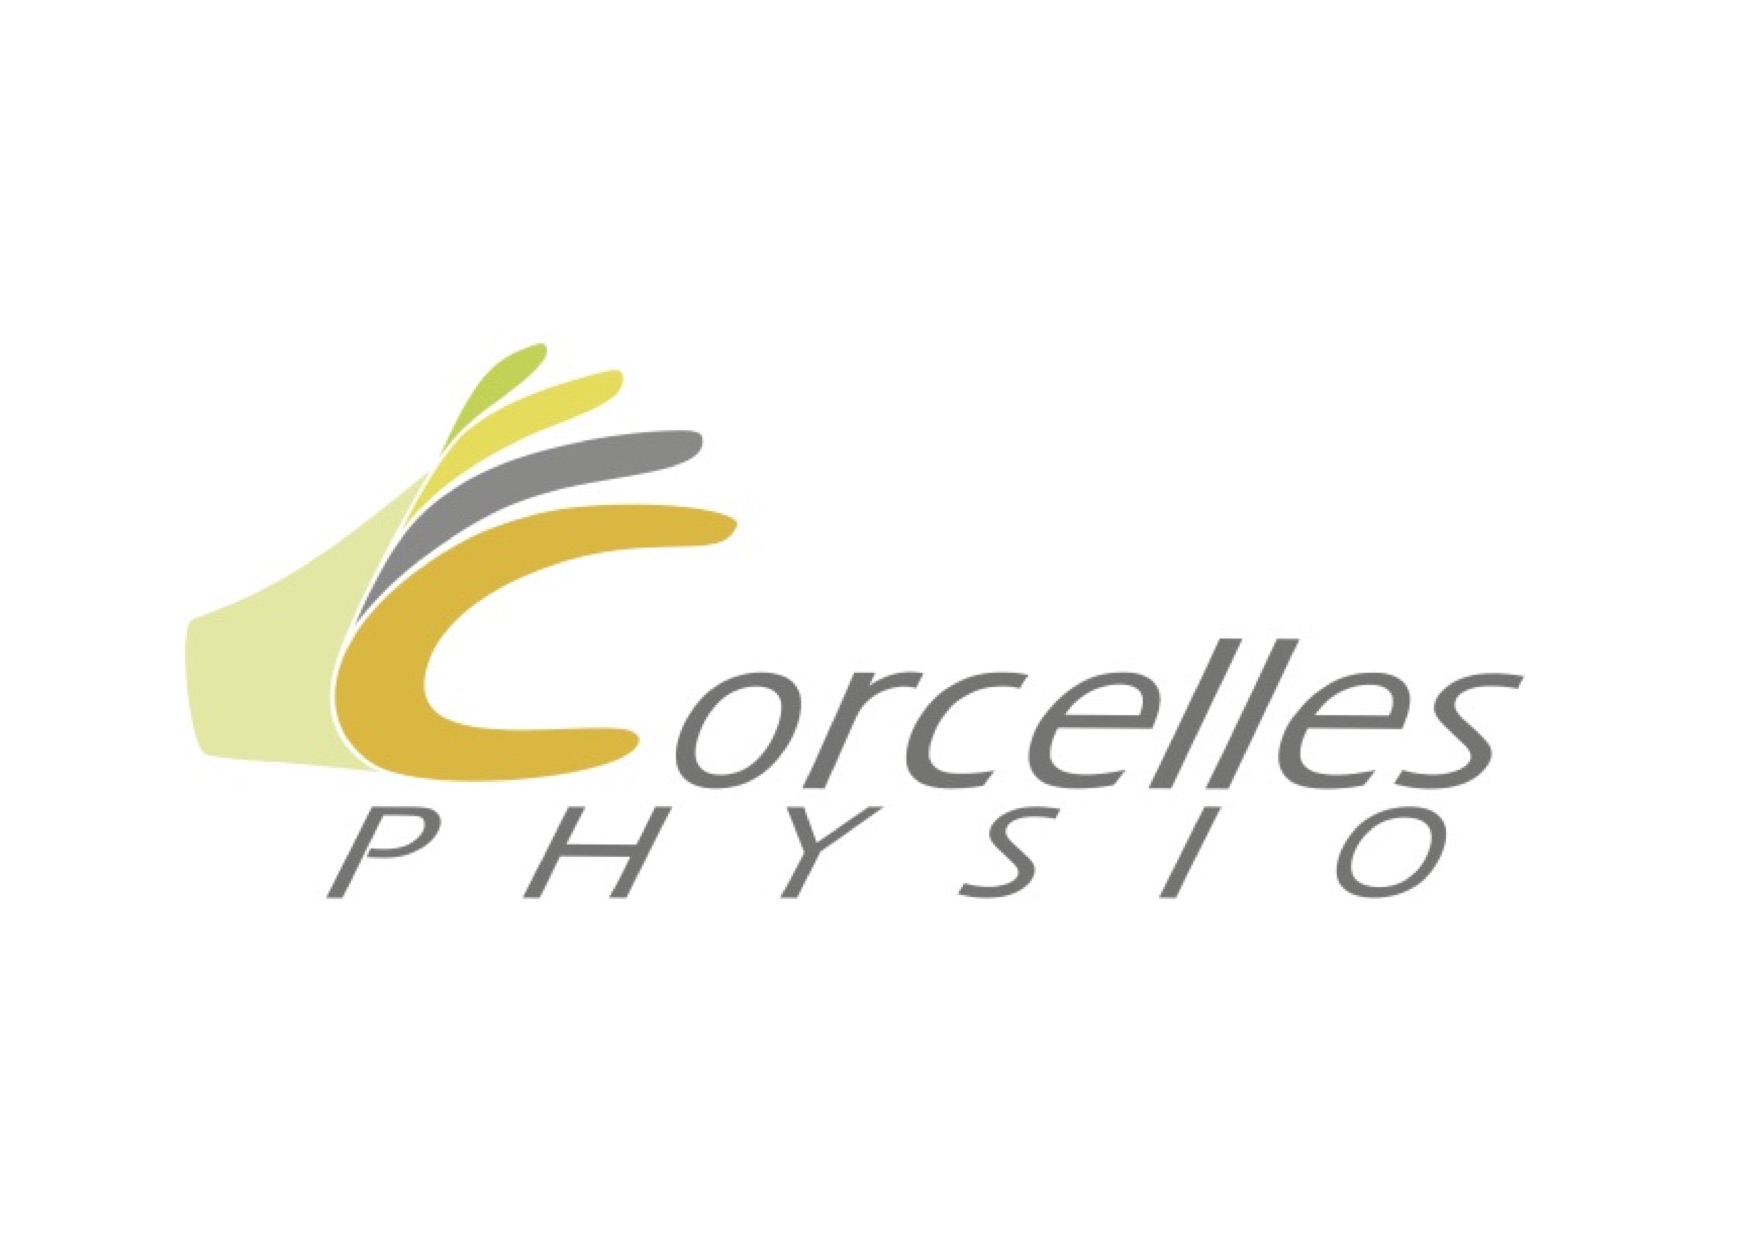 CorcellesPhysio